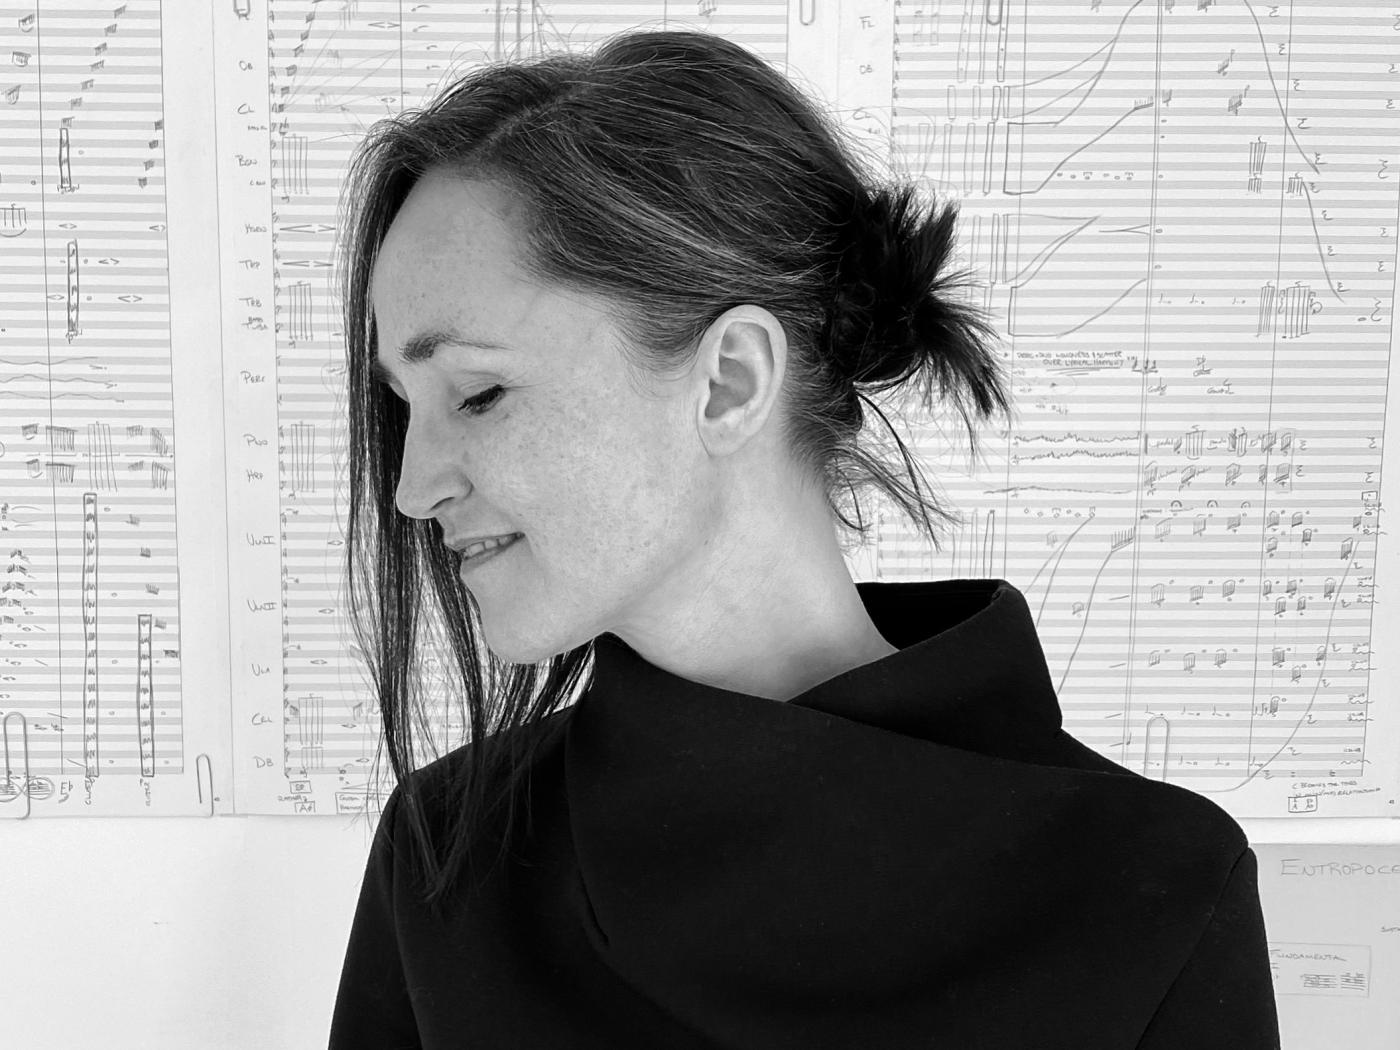 Anna Thorvaldsdottir begins her composing process by drawing shapes and writing words to help store musical information. Her scores themselves are finely detailed.